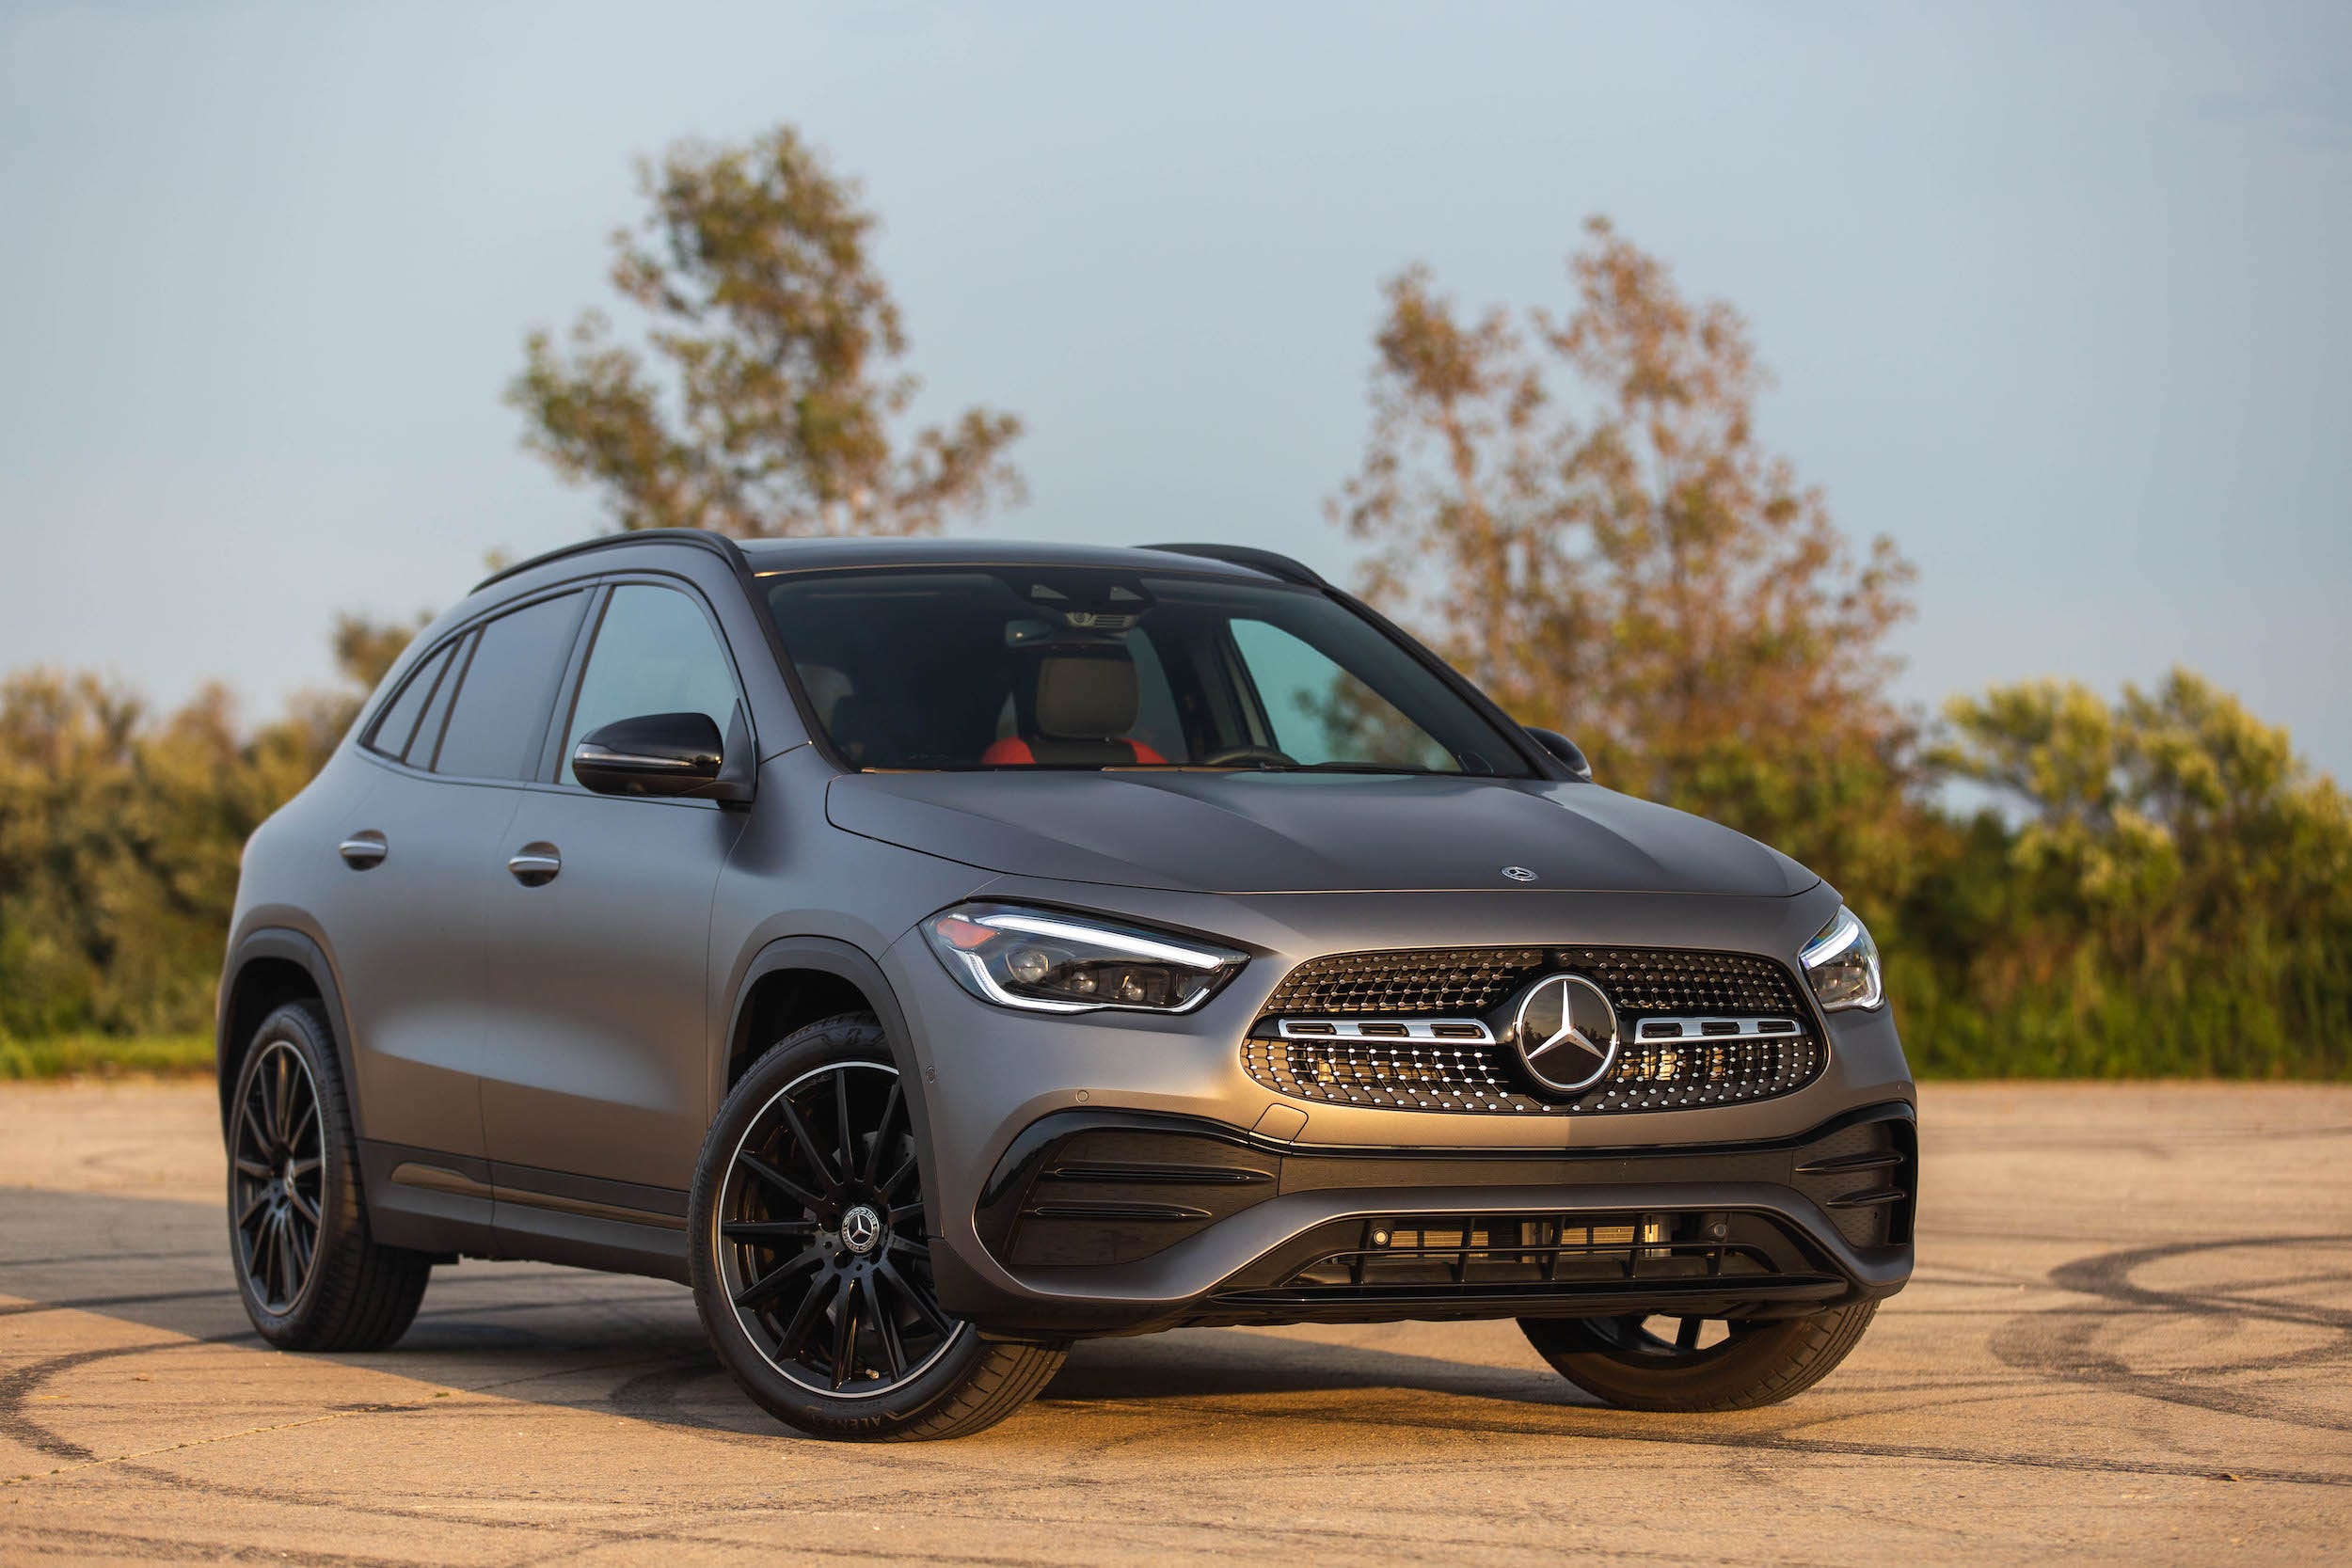 REVIEW The new MercedesBenz GLA 250 compact SUV packs plenty of